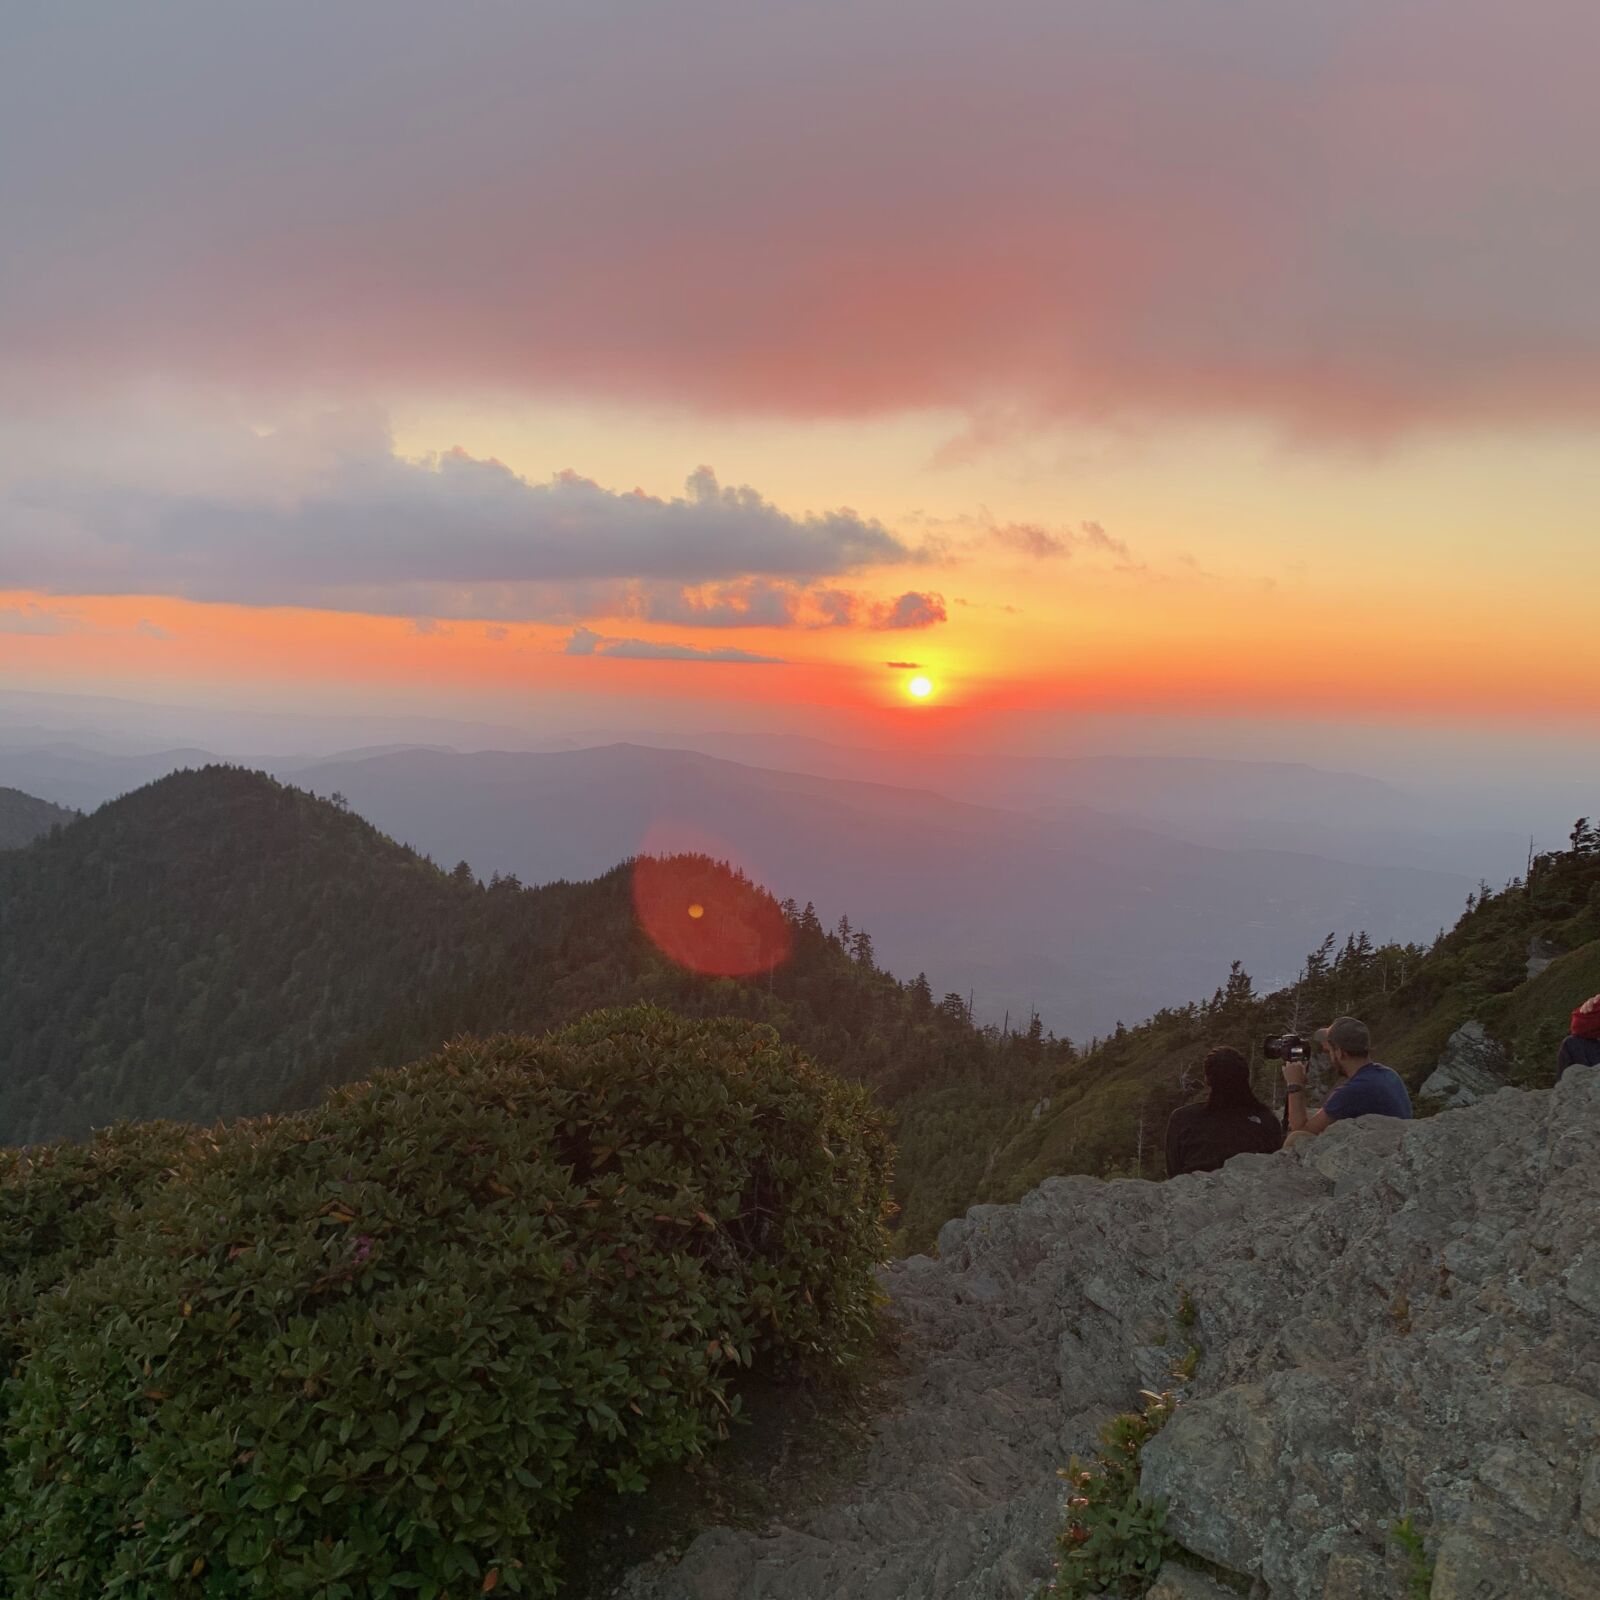 Apple iPhone XR sample photo. "Mountains, sunset, scenic" photography